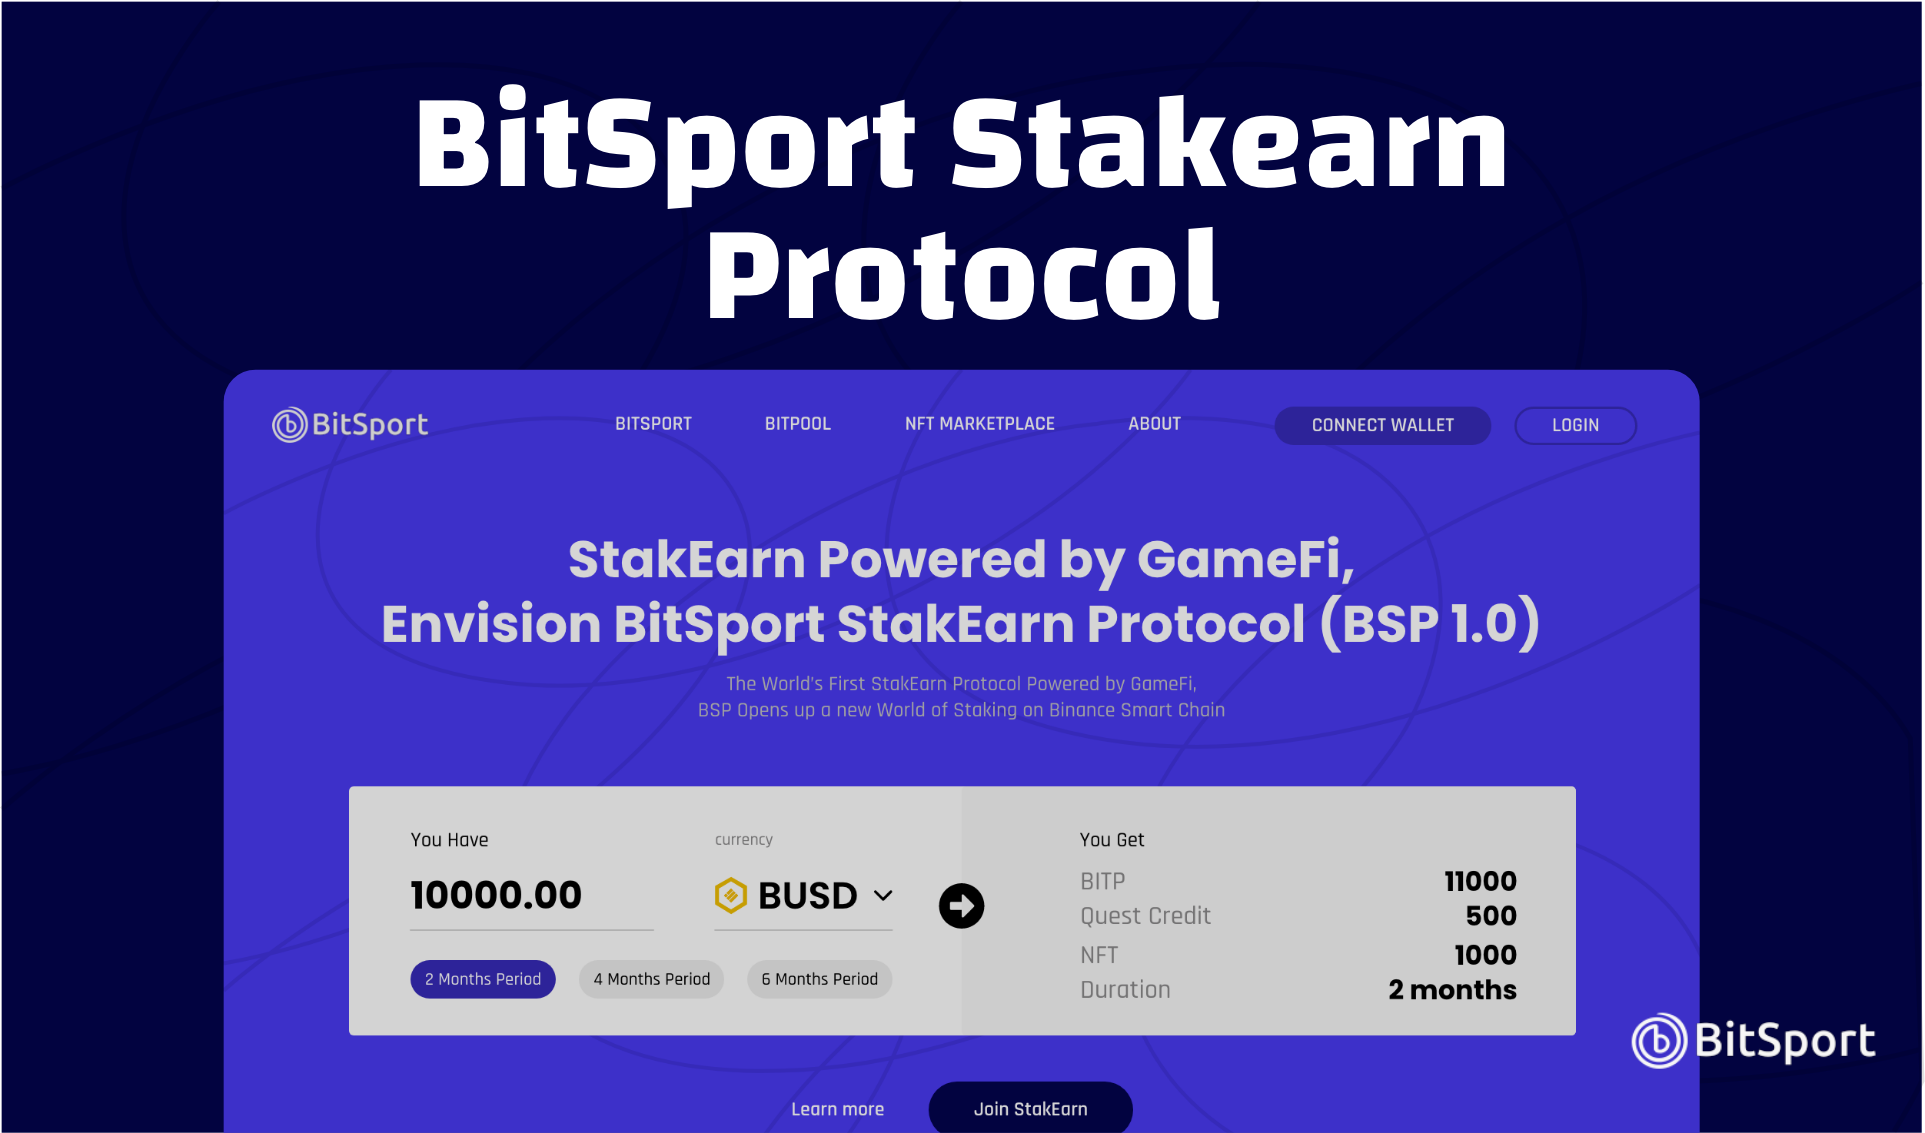 Exploring the Benefits of BitSport’s StakEarn Protocol